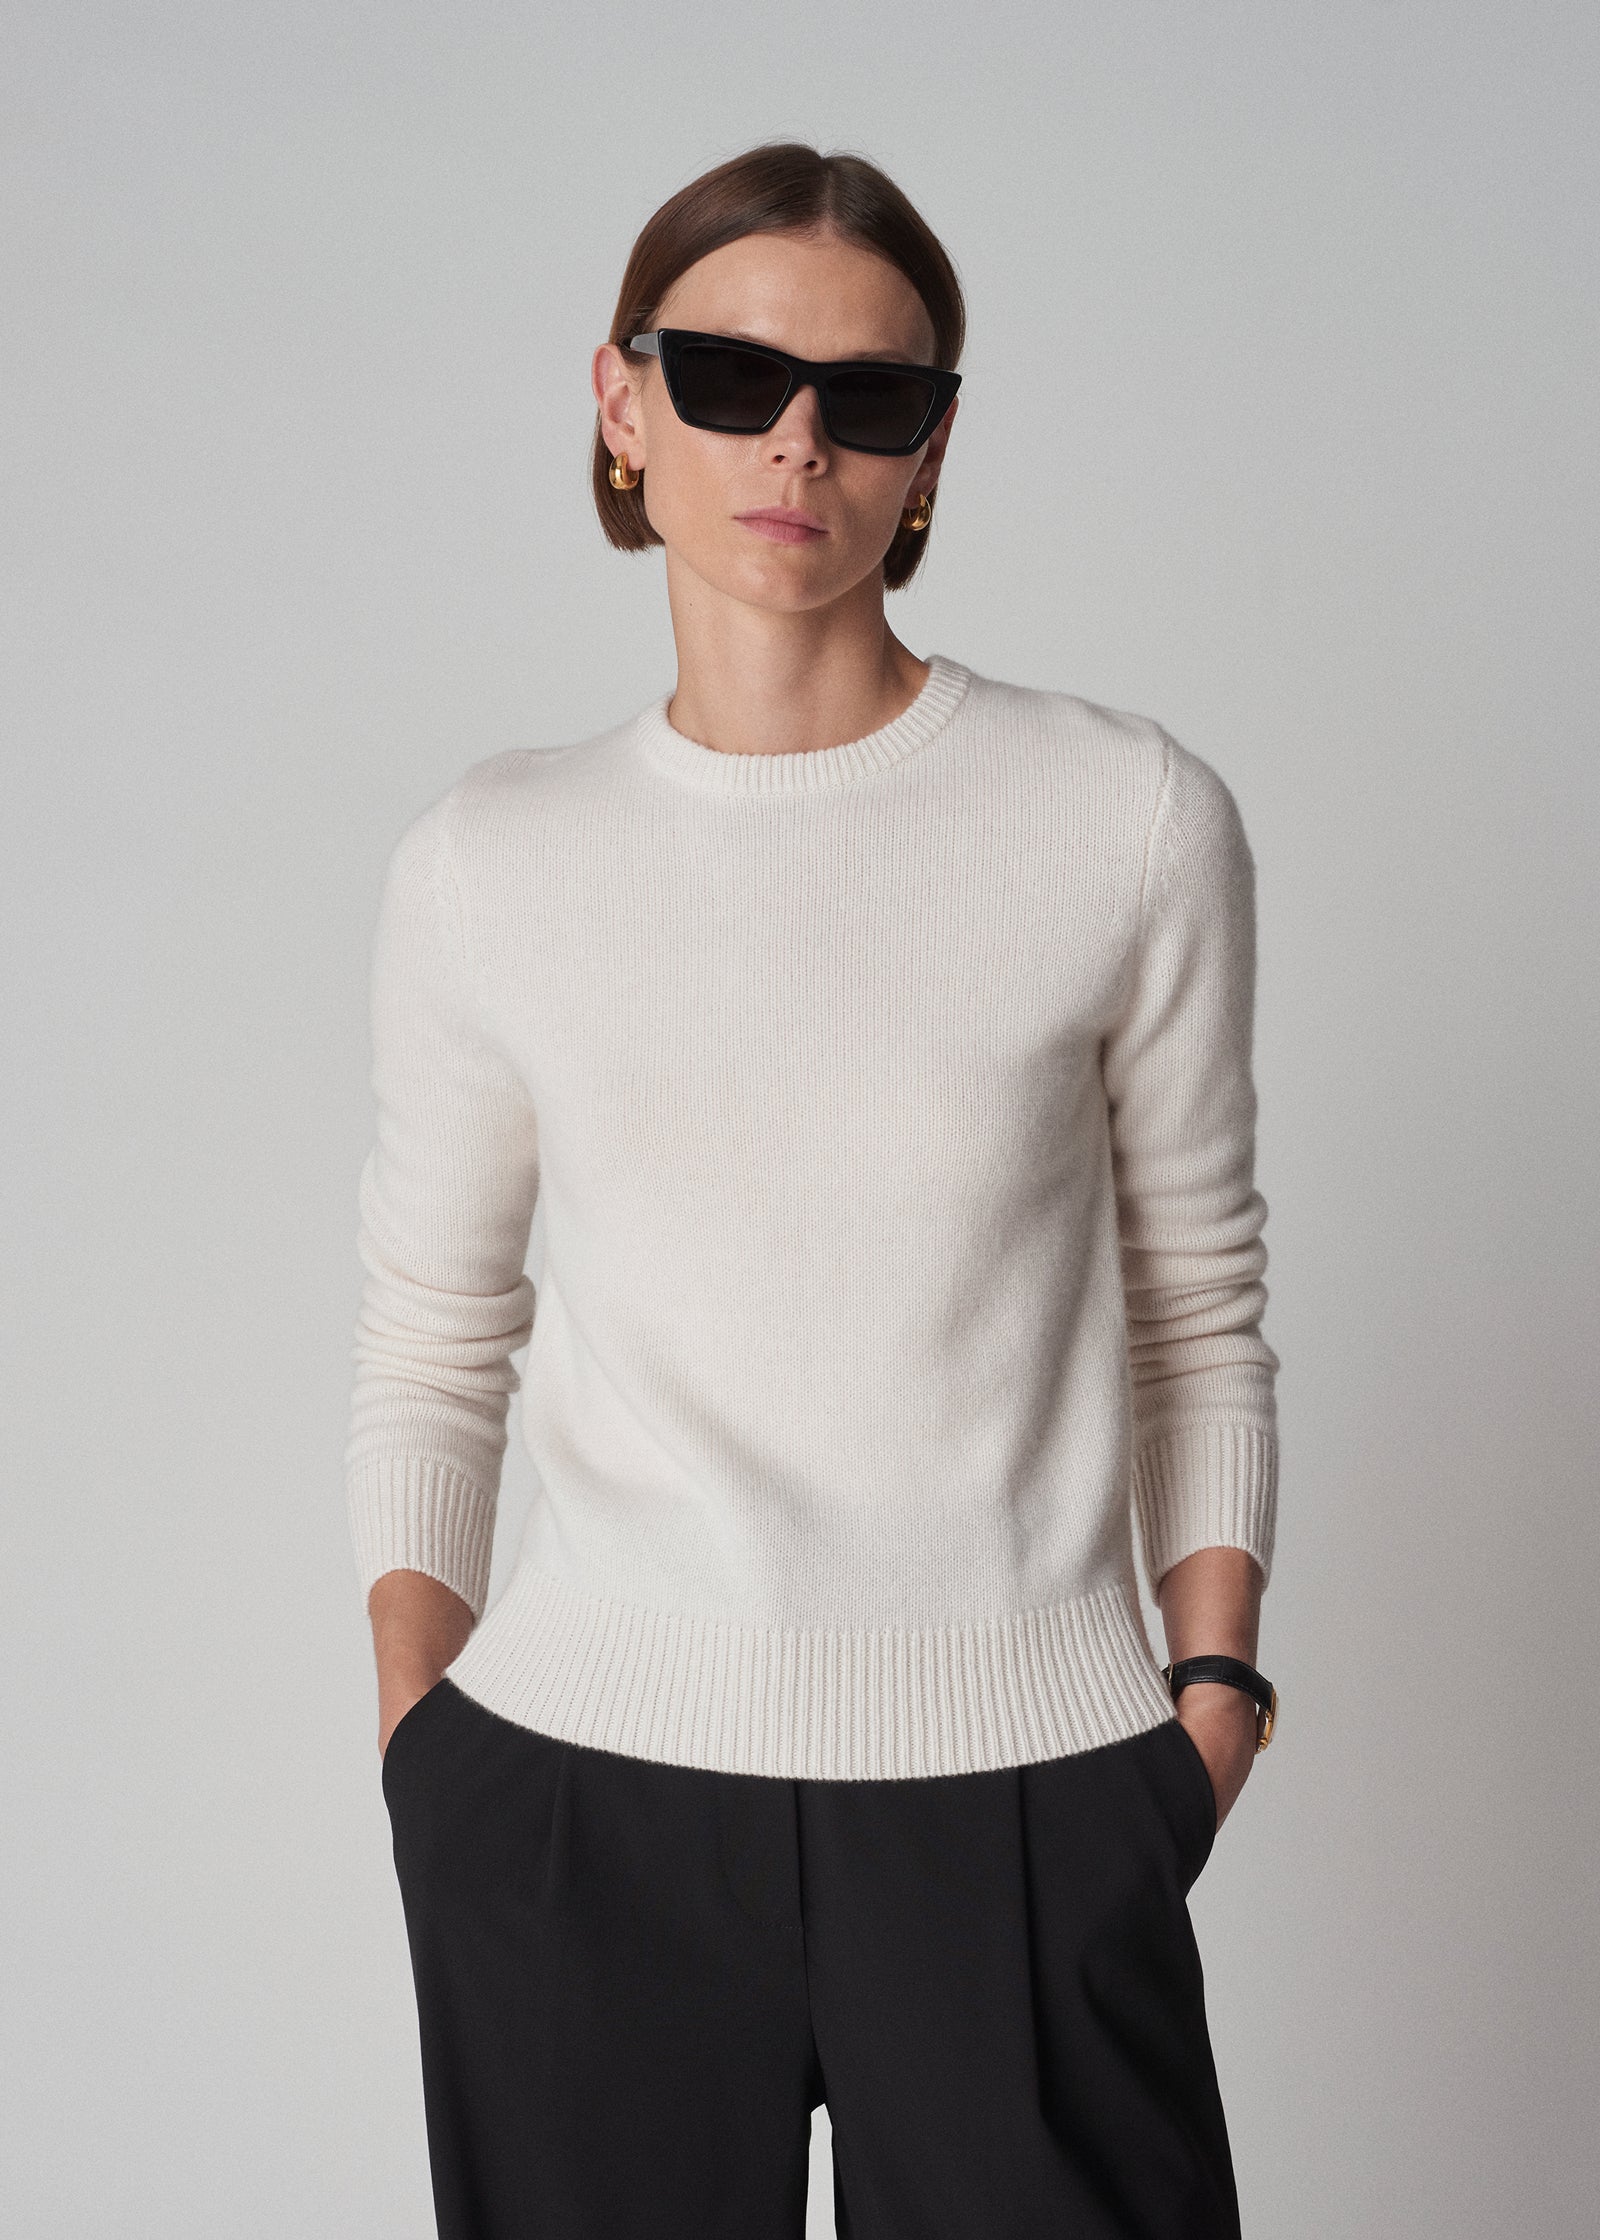 Classic Crew Neck in Cashmere - Ivory - CO Collections